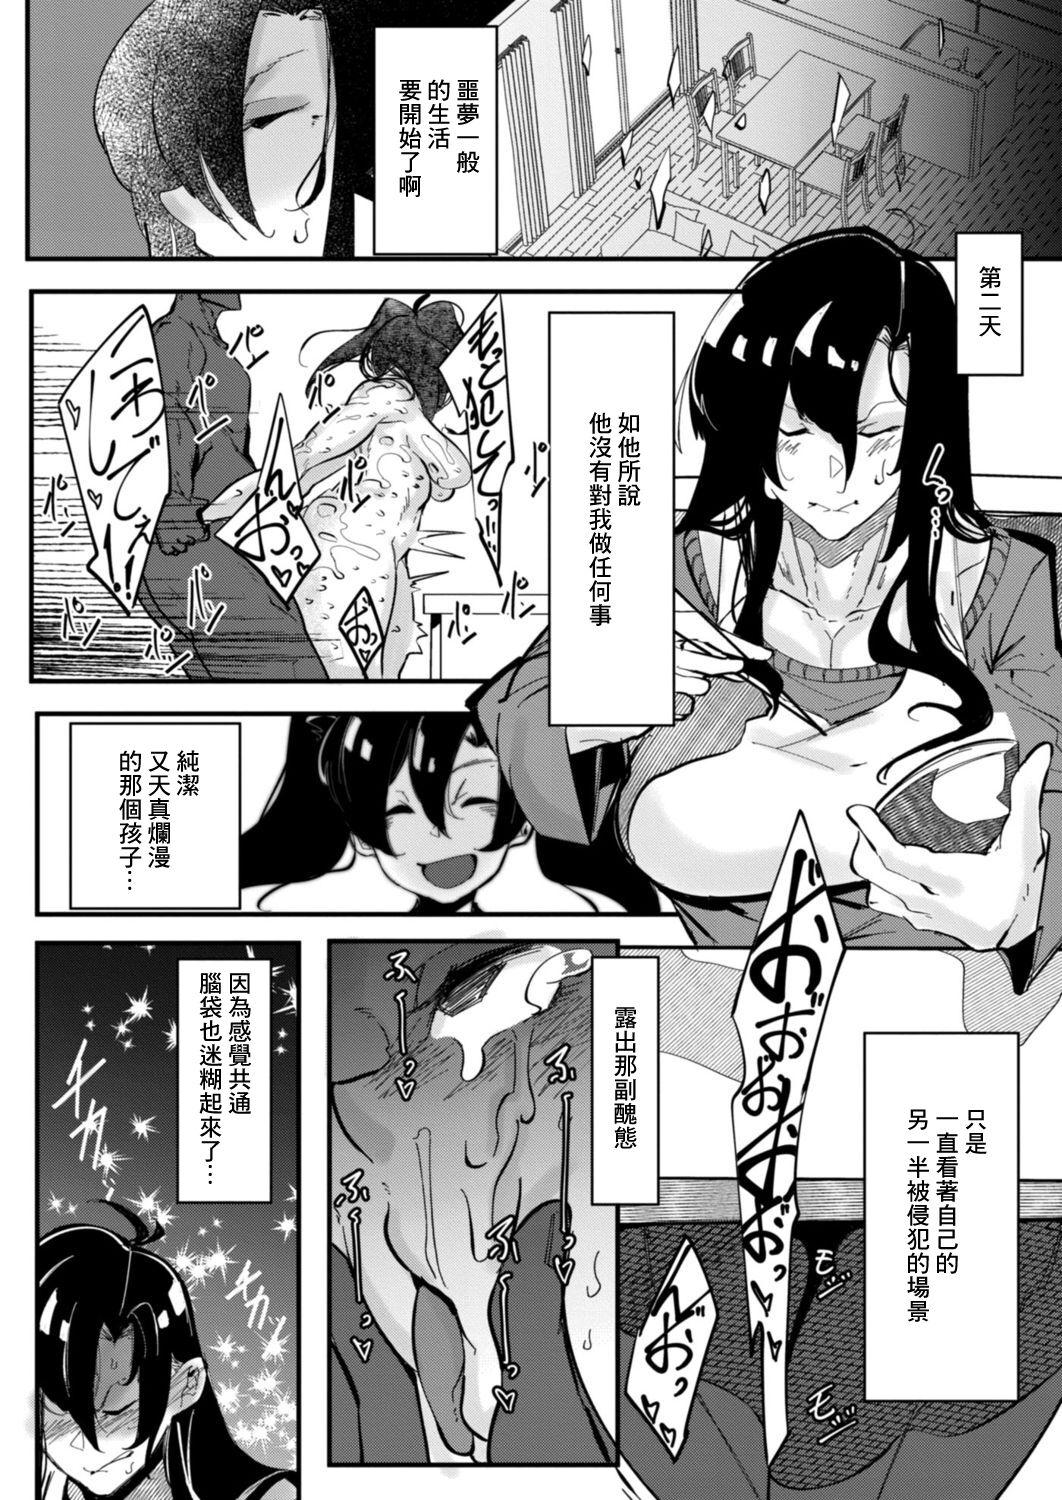 HERO DAY TIME Ch. 8 6